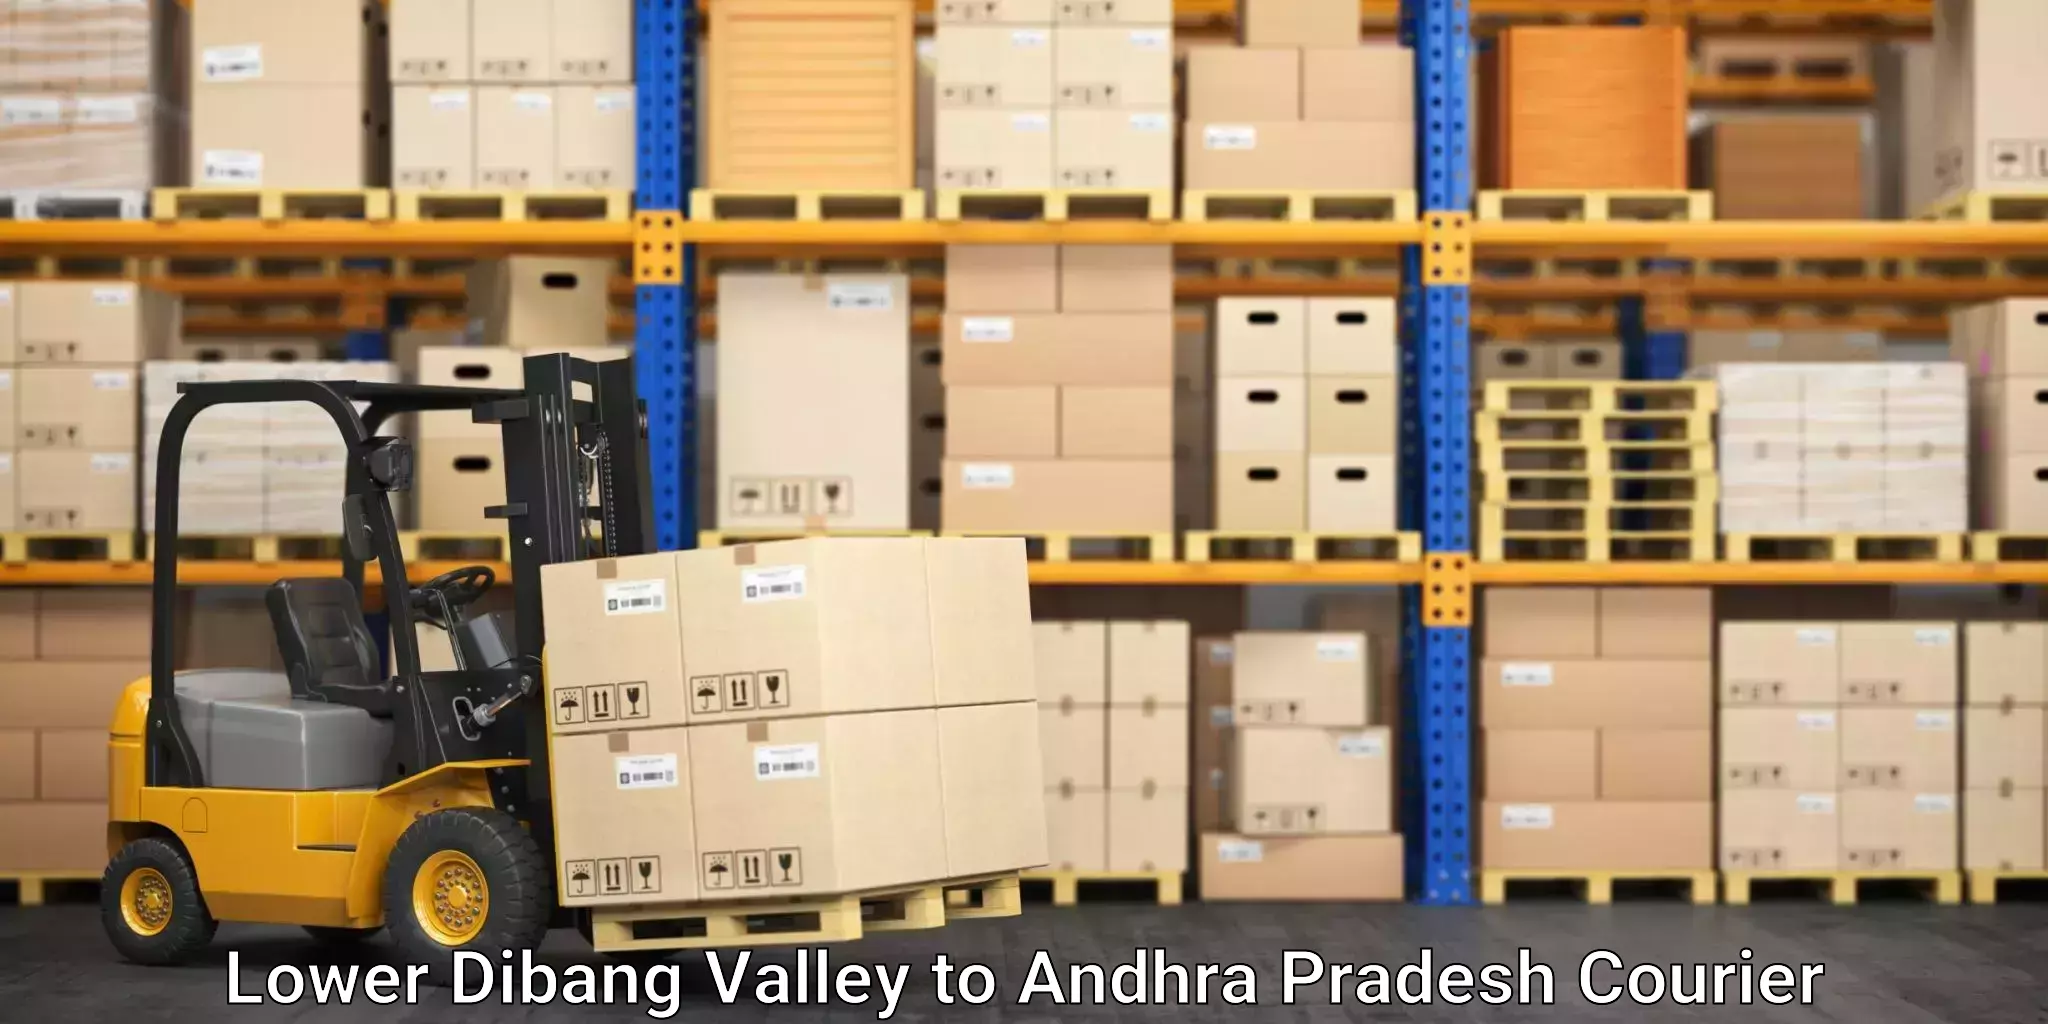 Comprehensive shipping network in Lower Dibang Valley to Kudair